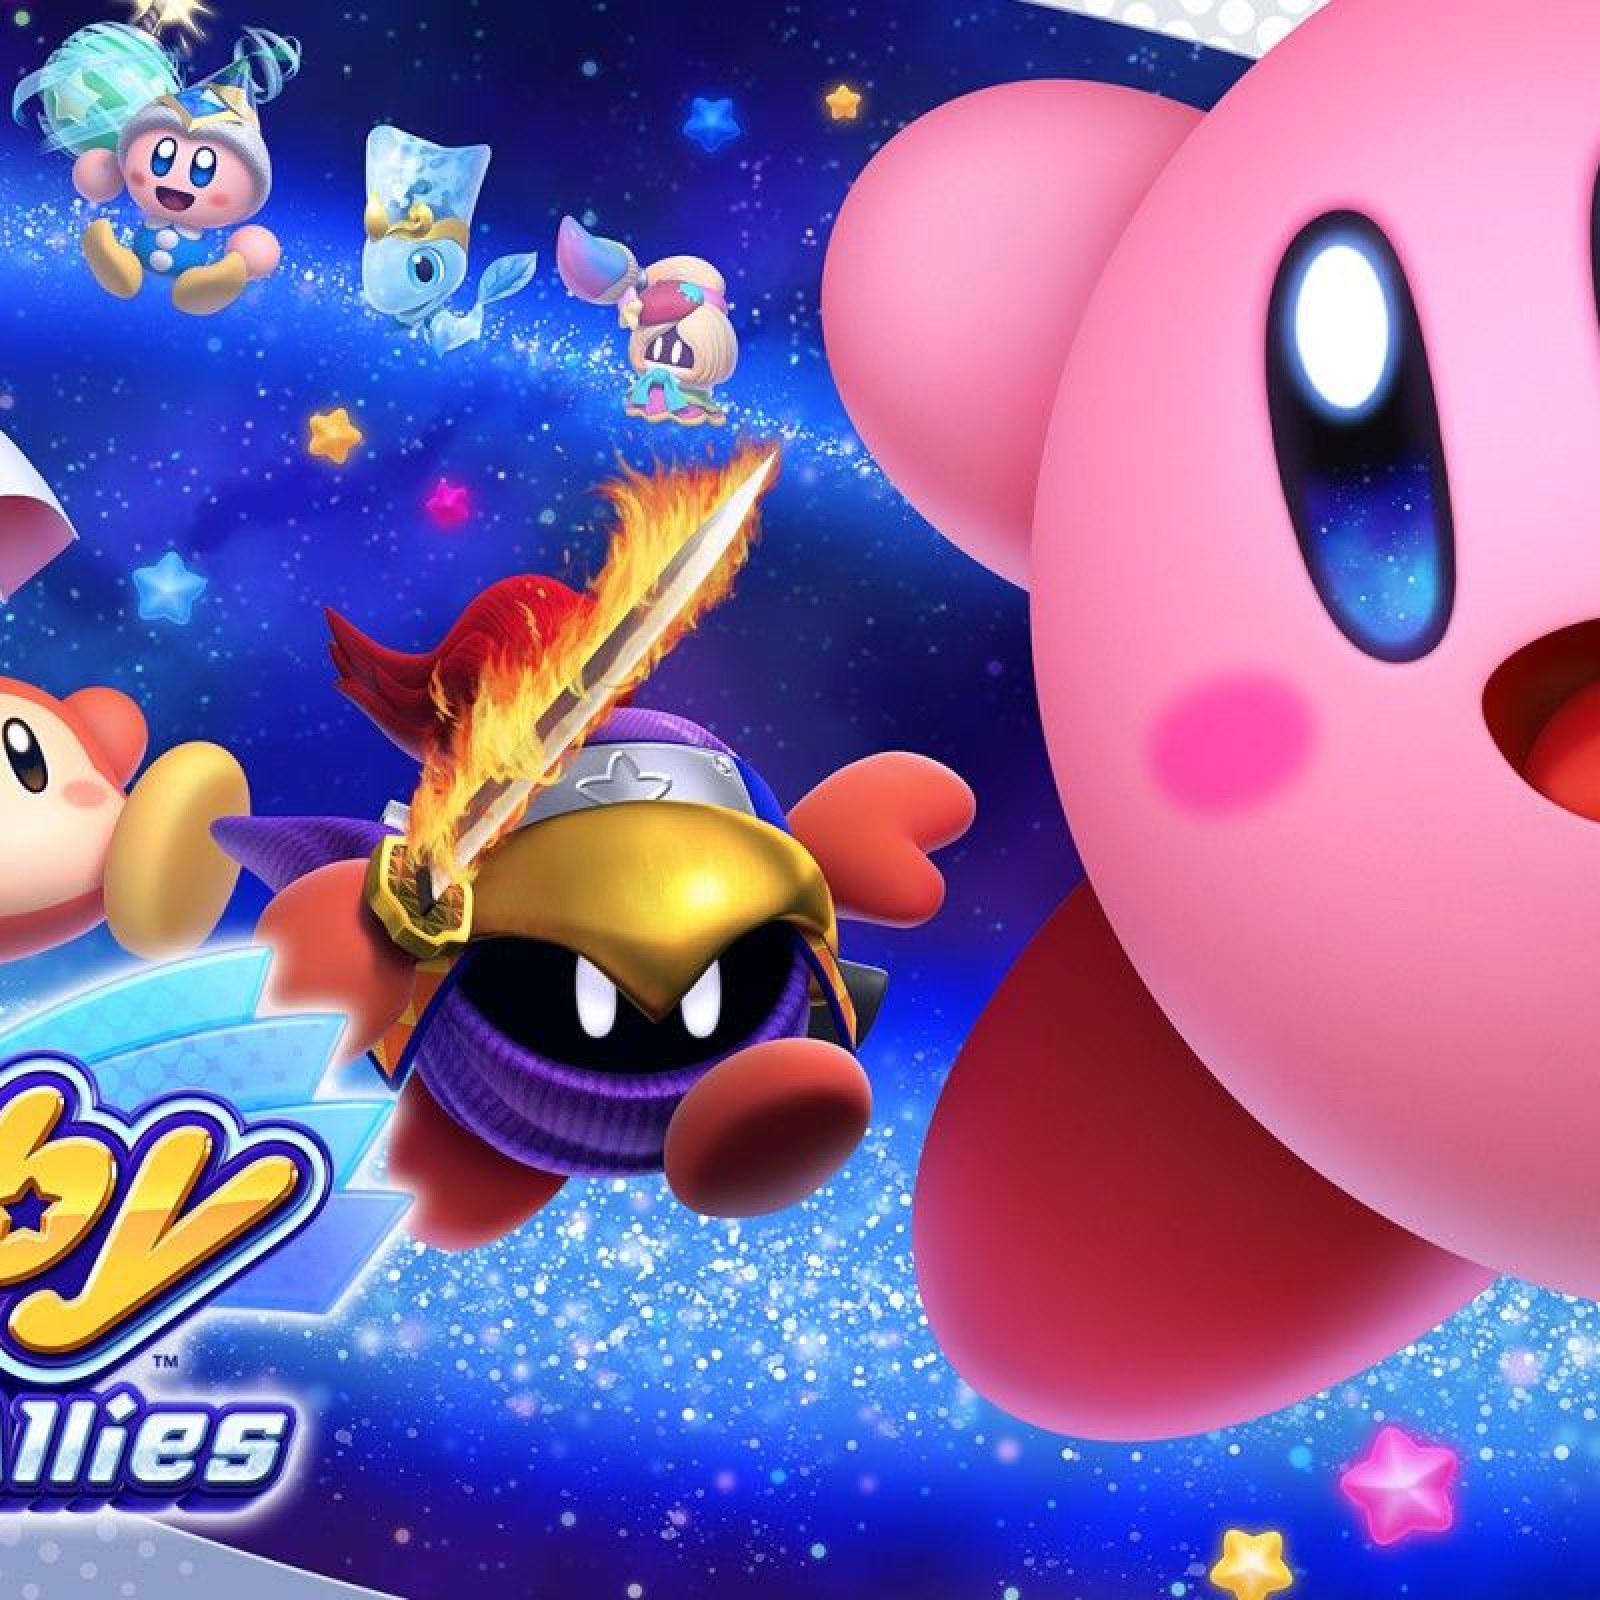 Kirby: Star Allies' Demo Datamine Leaks Bosses, Worlds, Abilities, Friend  Combos And More